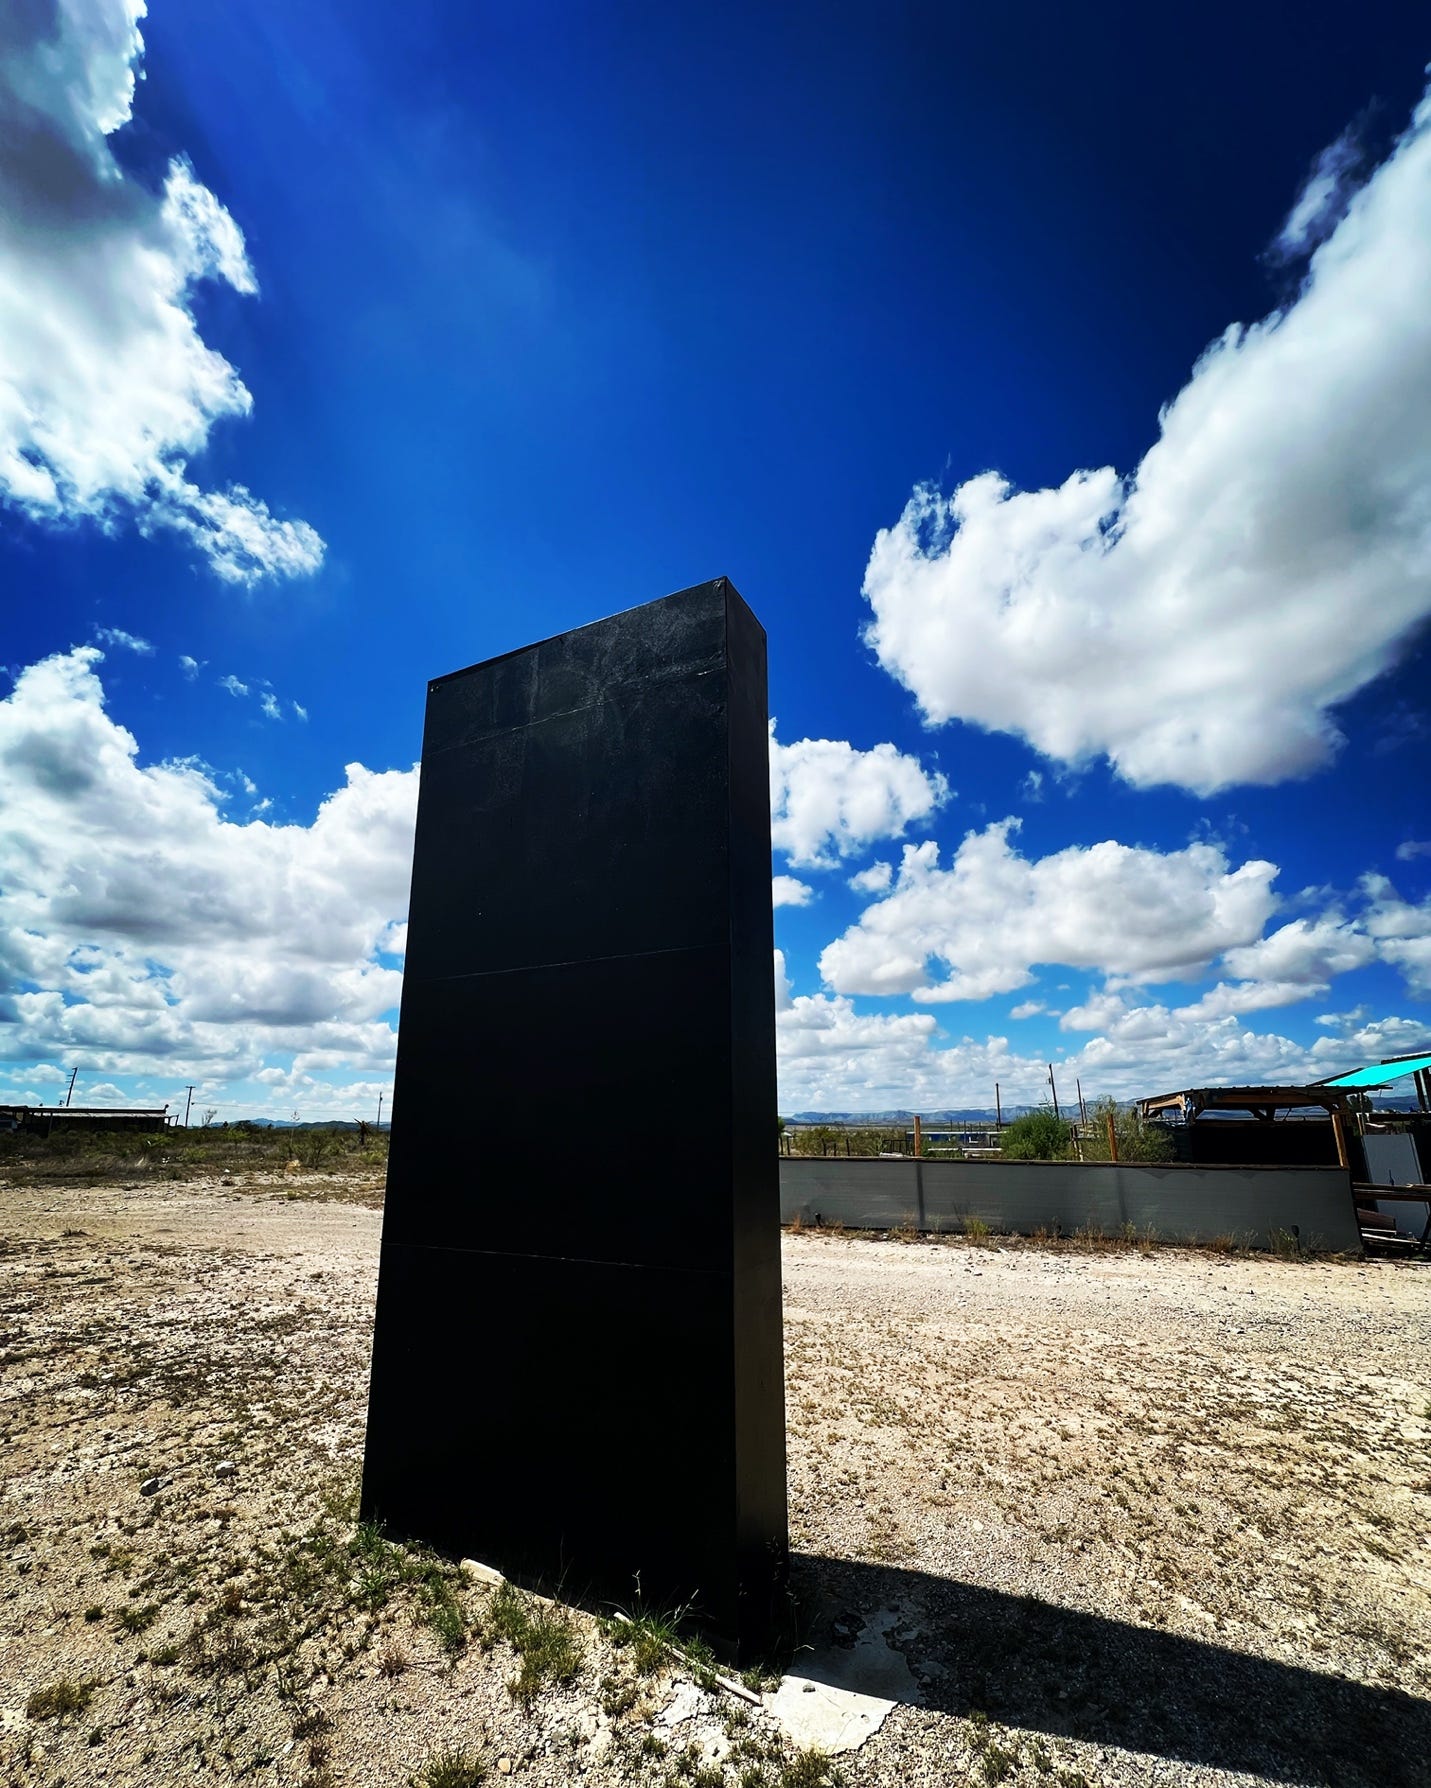 A tall black rectangular object in a dirt field

Description automatically generated